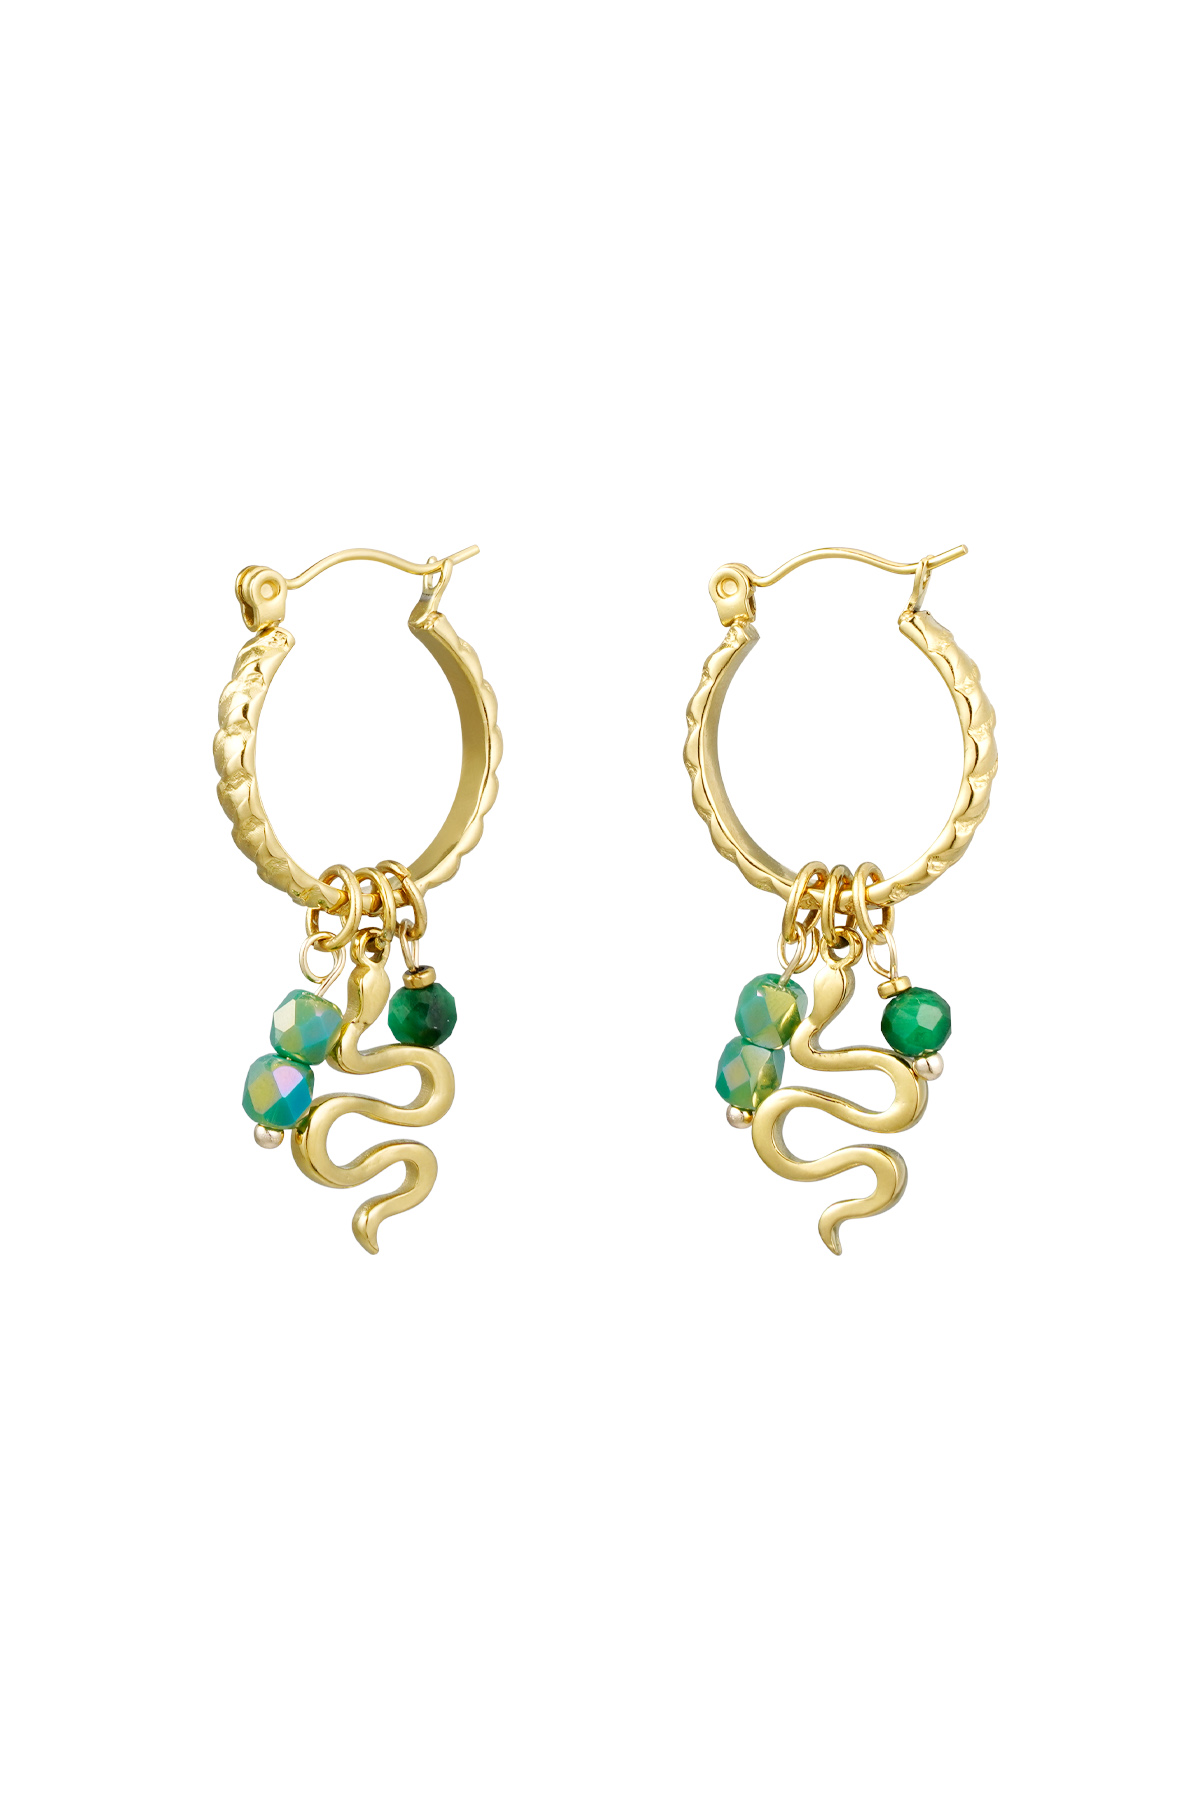 Snake earrings with beads - gold/green